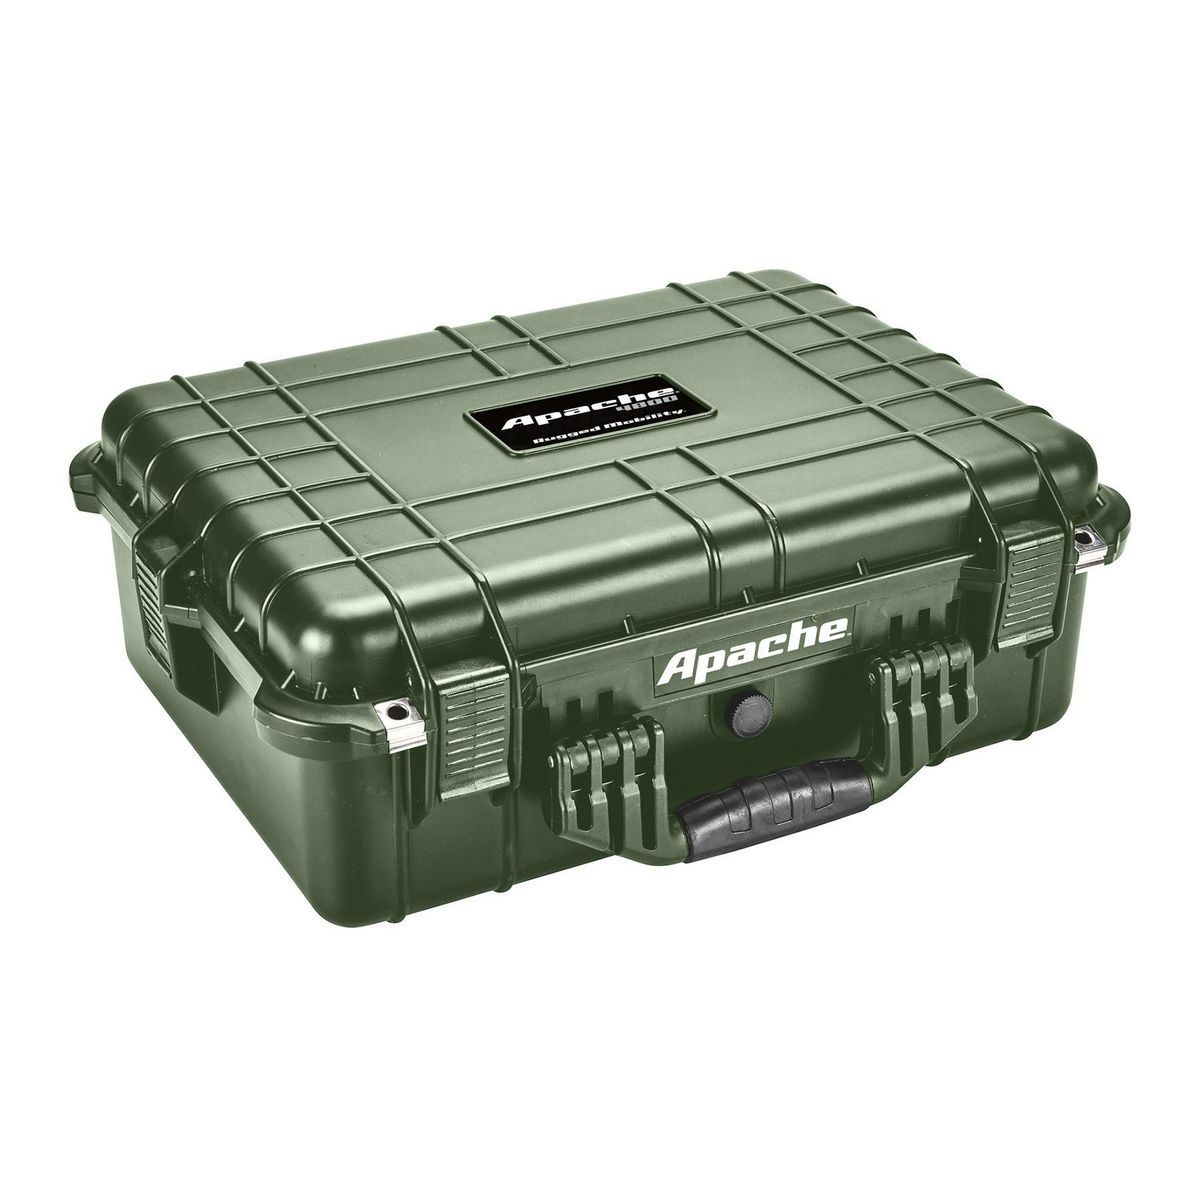 Green Apache 4800 Weatherproof Protective Case, X-Large, Watertight, dust-tight, impact resistant protective case - Click Image to Close